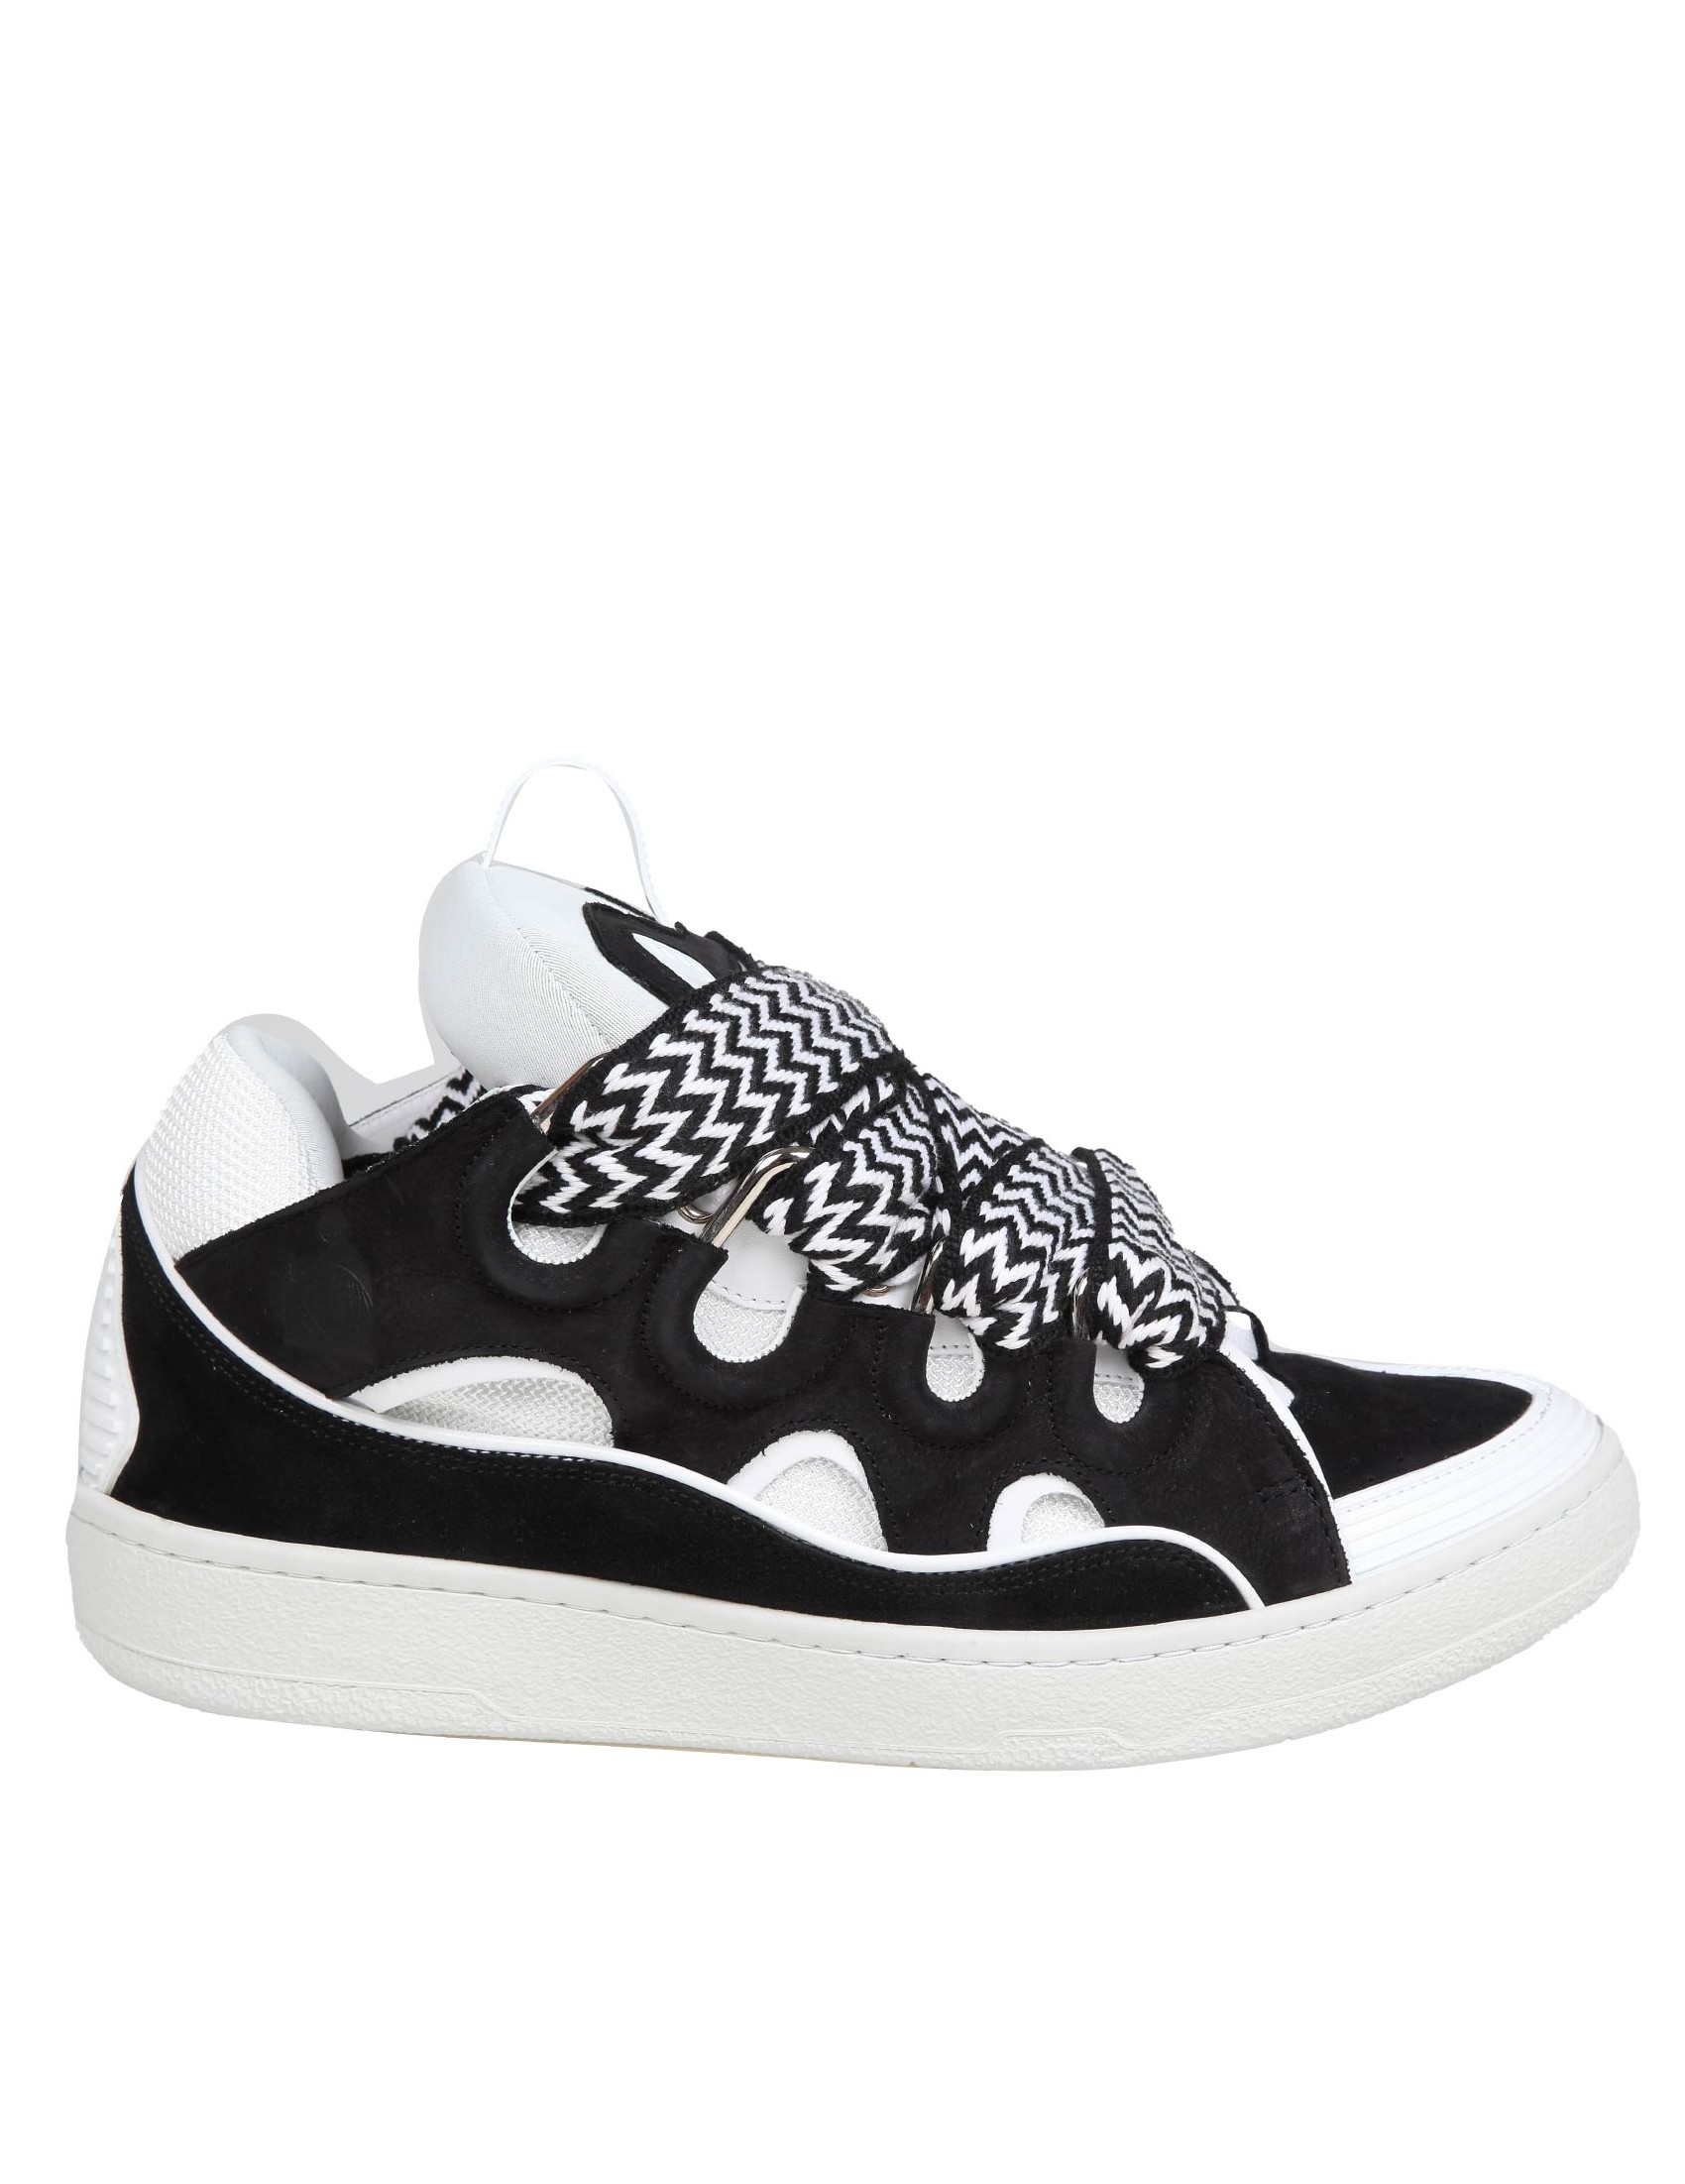 LANVIN CURB SNEAKERS LANVIN CURB LEATHER AND SUEDE SNEAKERS WITH MULTICOLOR LACE